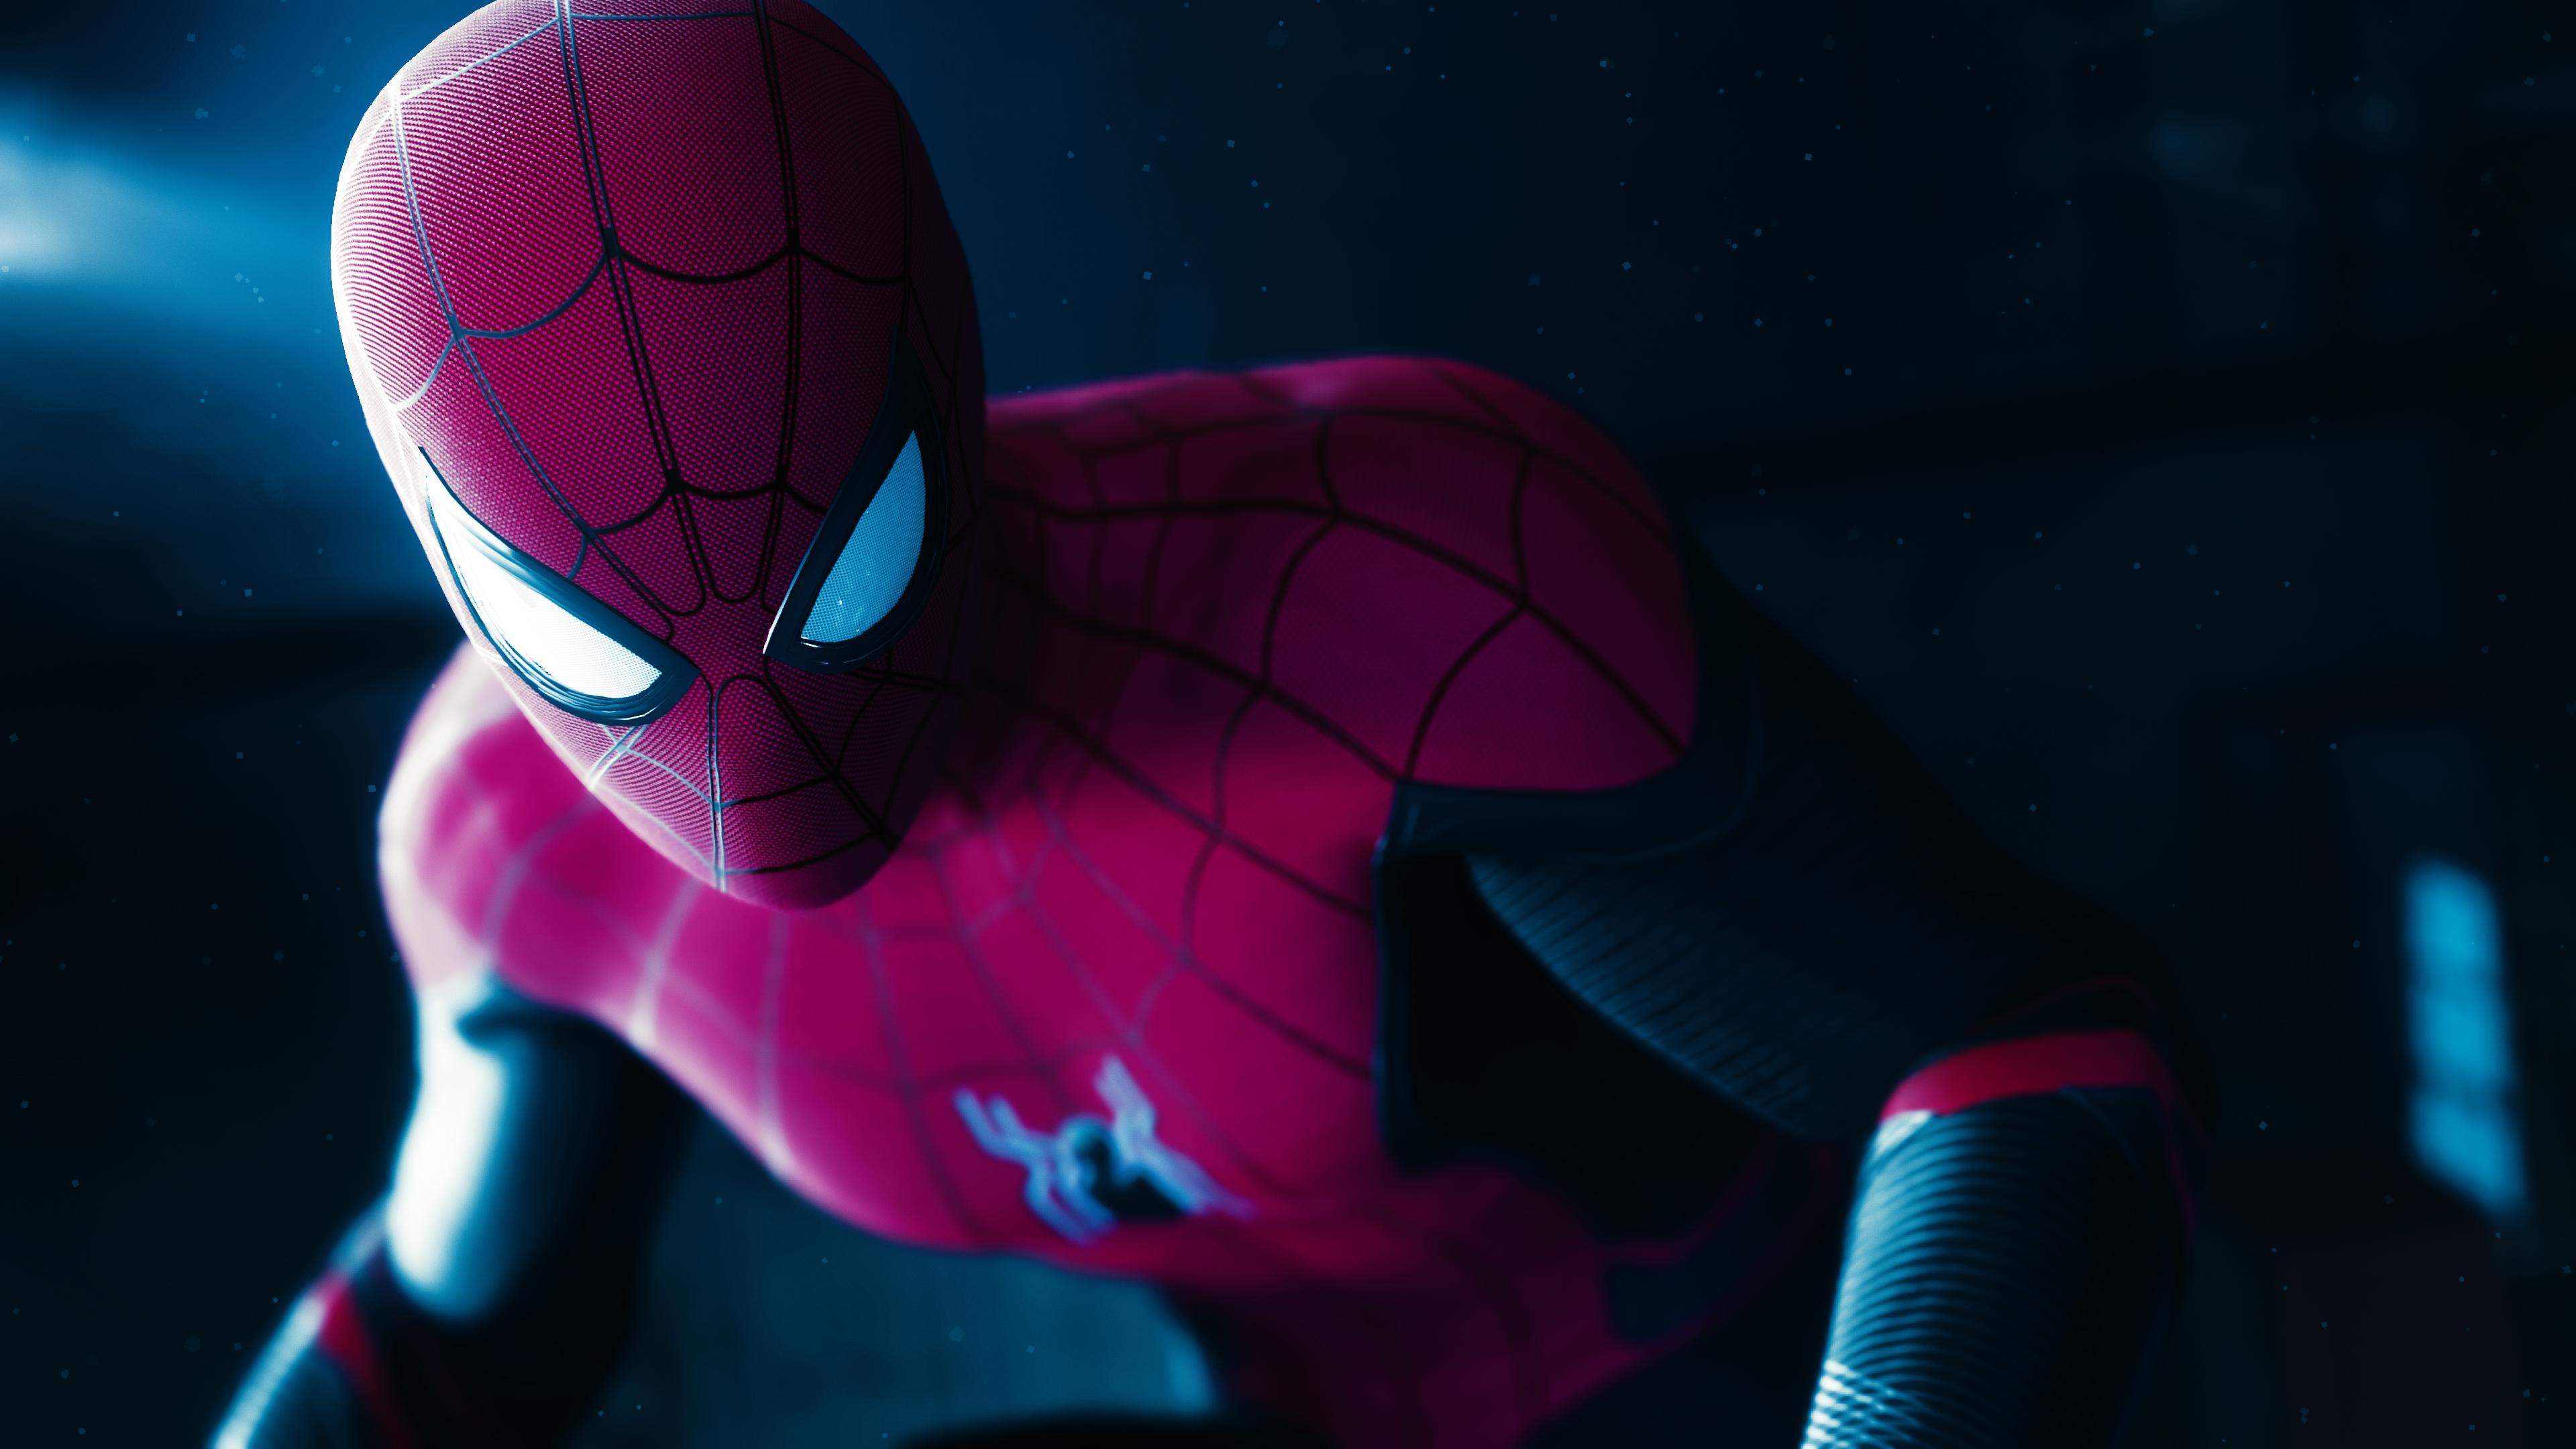 Spider Man Far From Home PS4 Pro Game 4K Wallpaper. HD Wallpaper